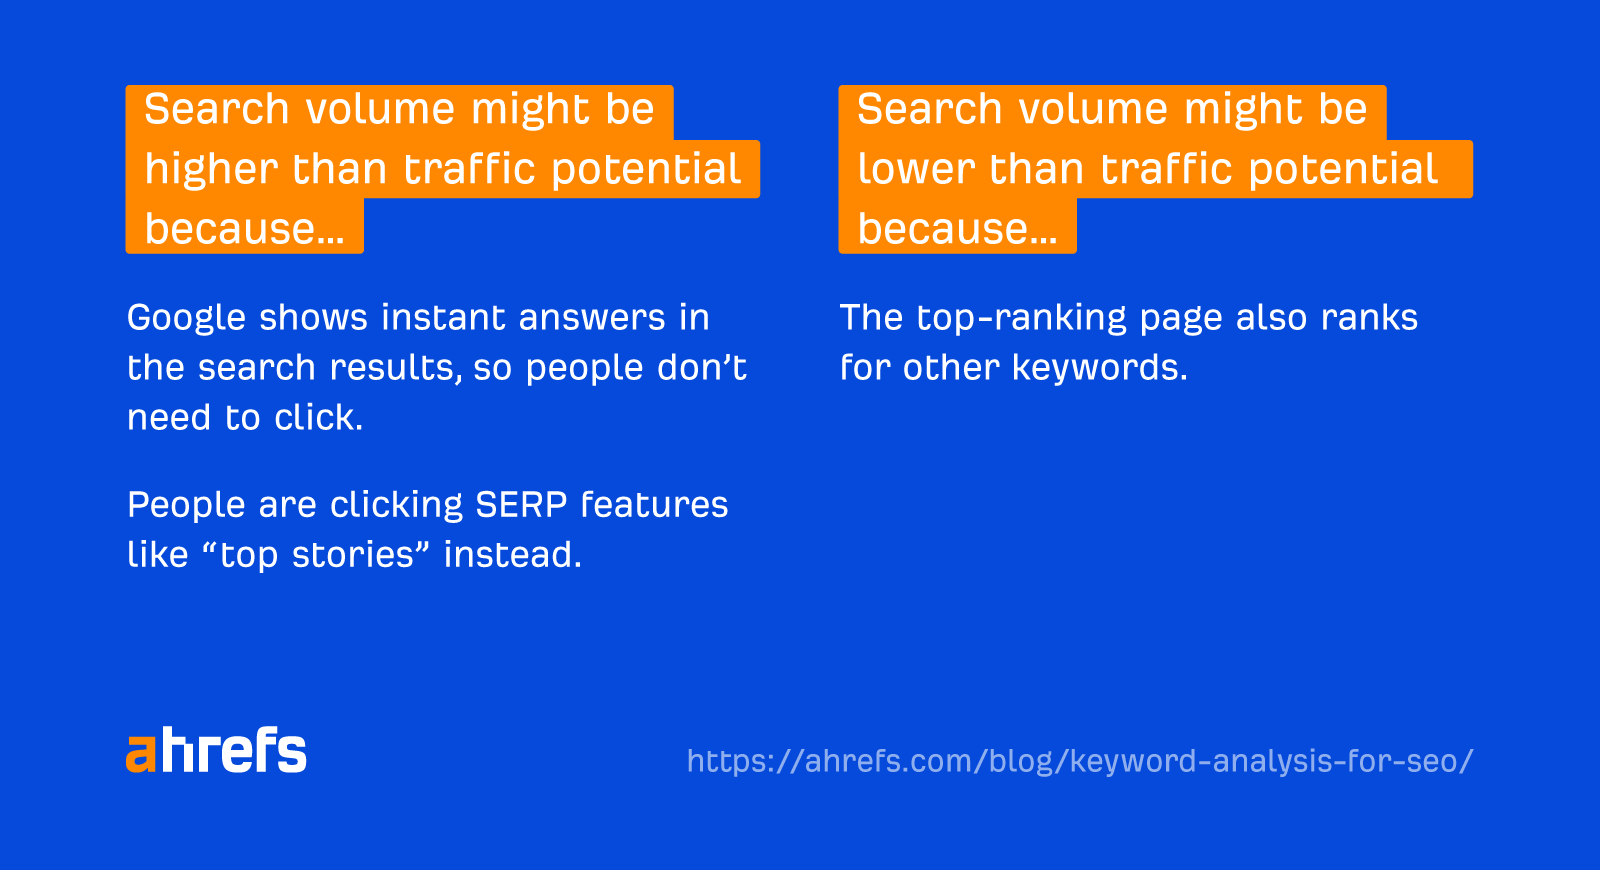 Why keyword search volume and traffic potential can differ